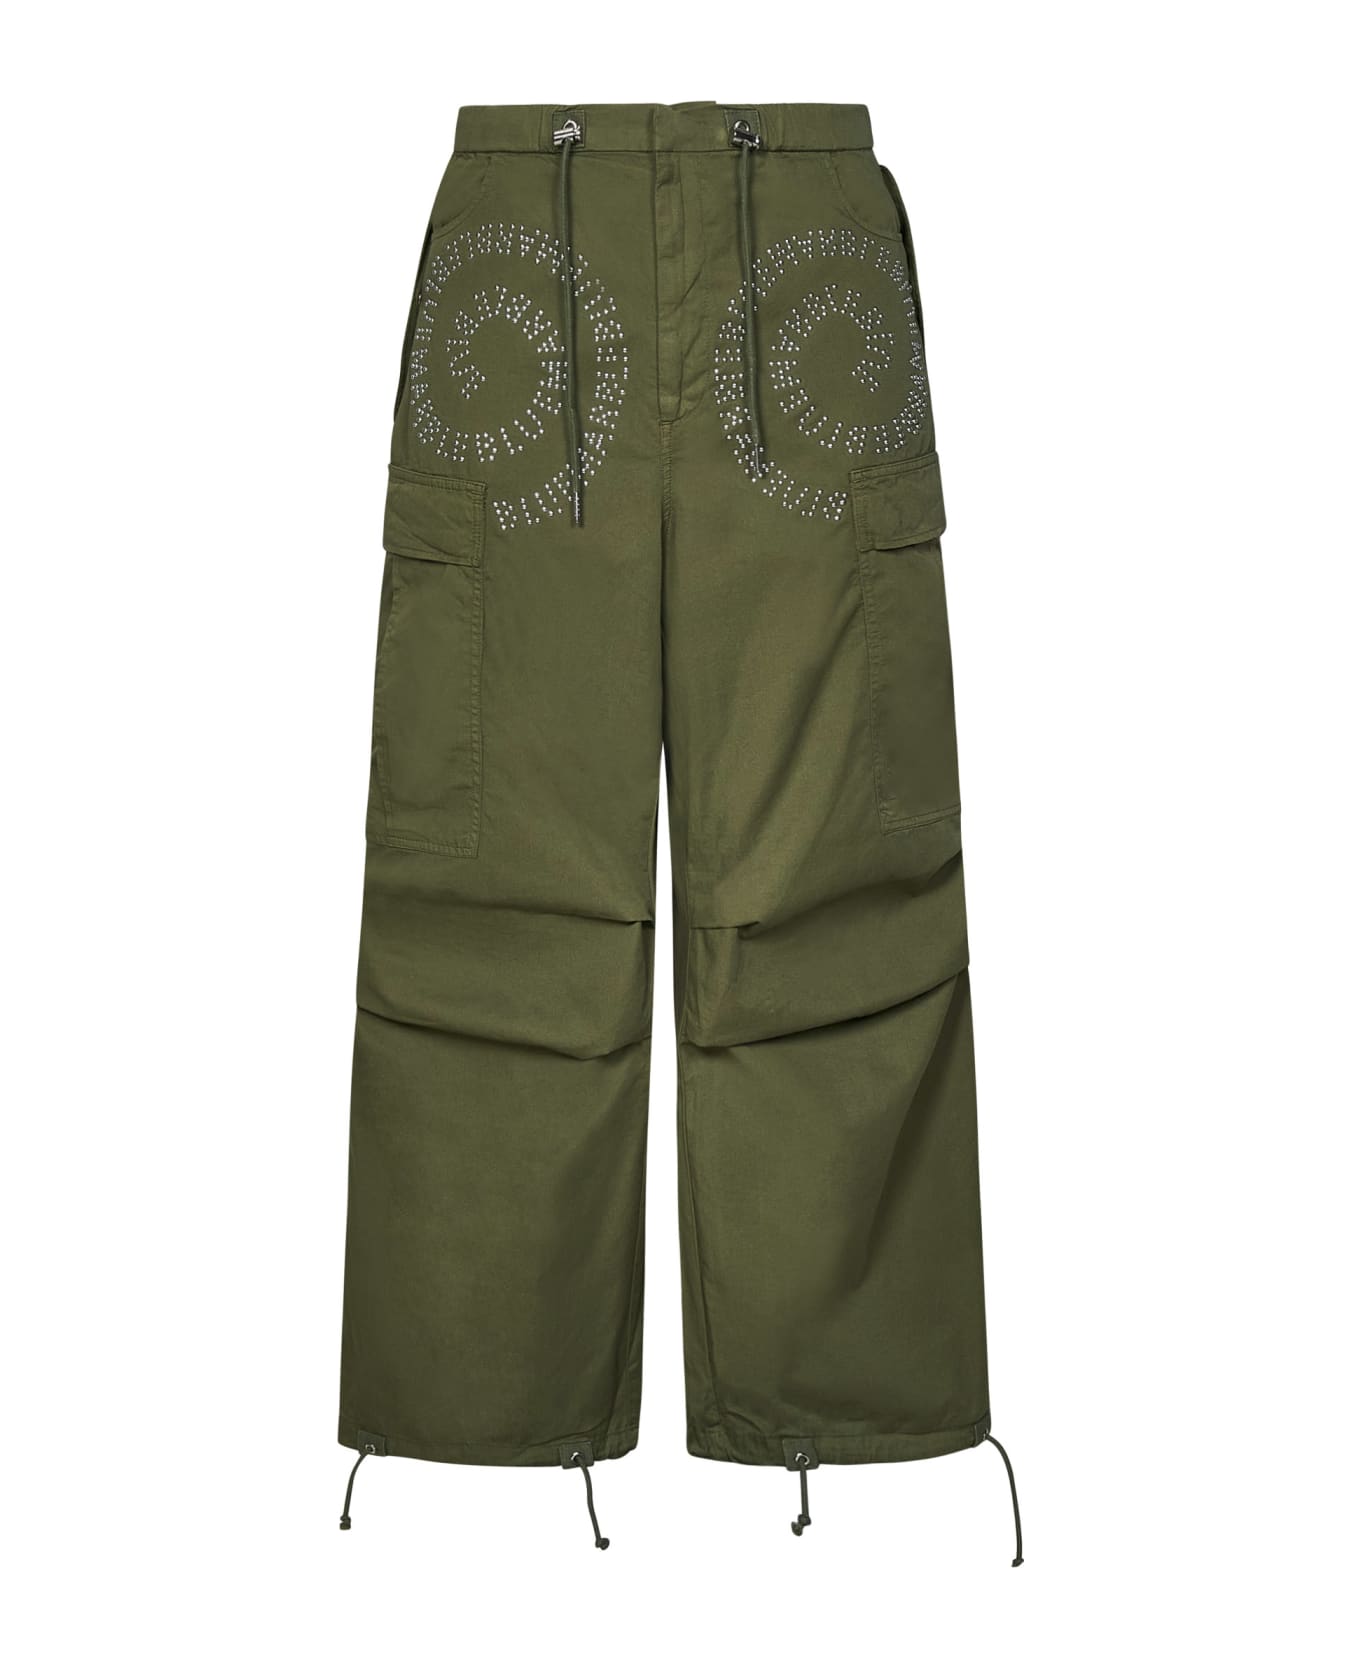 Bluemarble Trousers - Green ボトムス